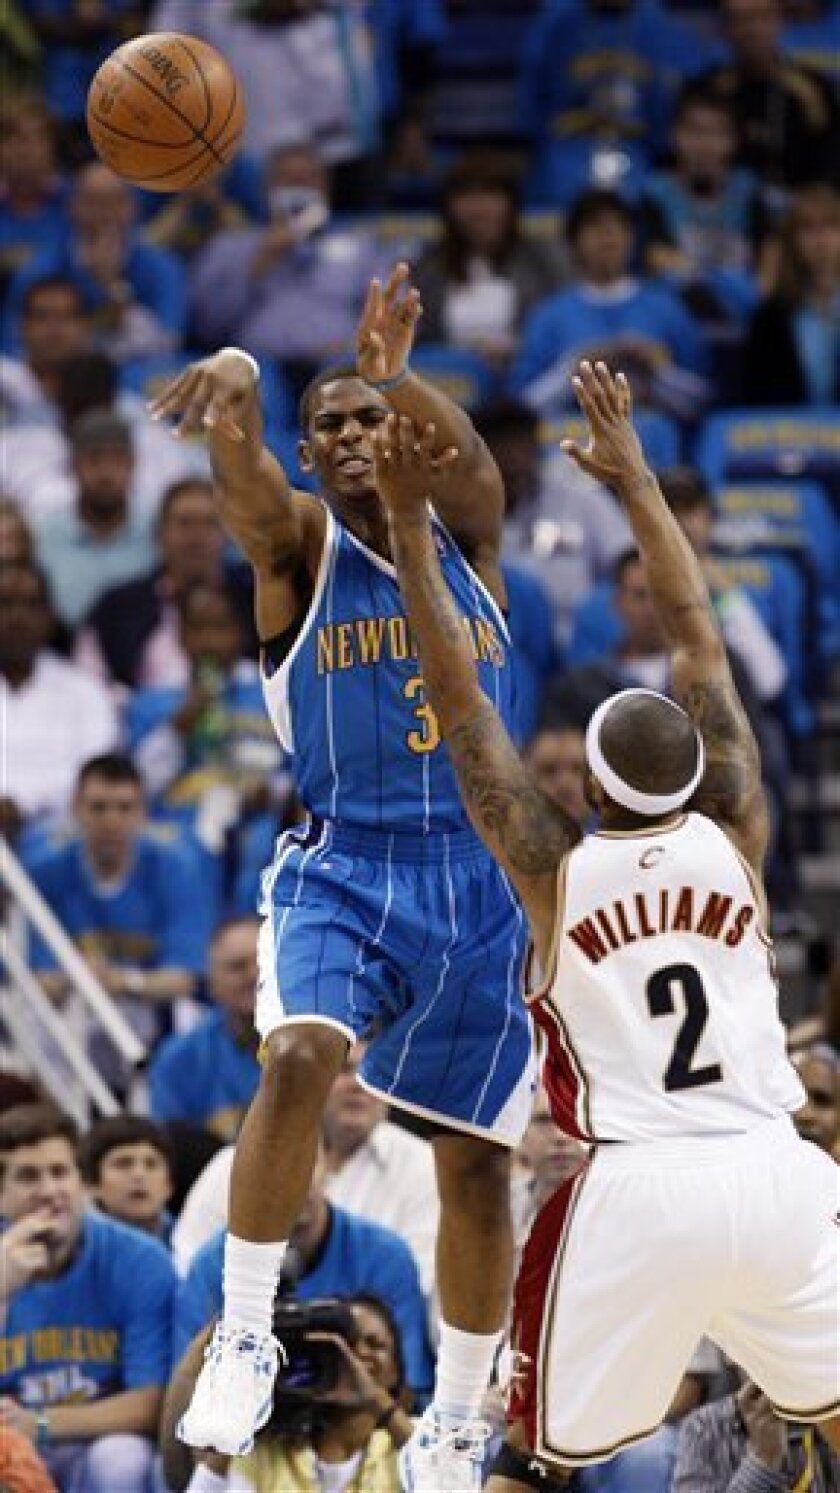 New Orleans Hornets guard Chris Paul, left, passes over the reach of Cleveland Cavaliers guard Mo Williams (2) during the first quarter of an NBA basketball game in New Orleans, Saturday, Nov. 1, 2008. (AP Photo/Ann Heisenfelt)